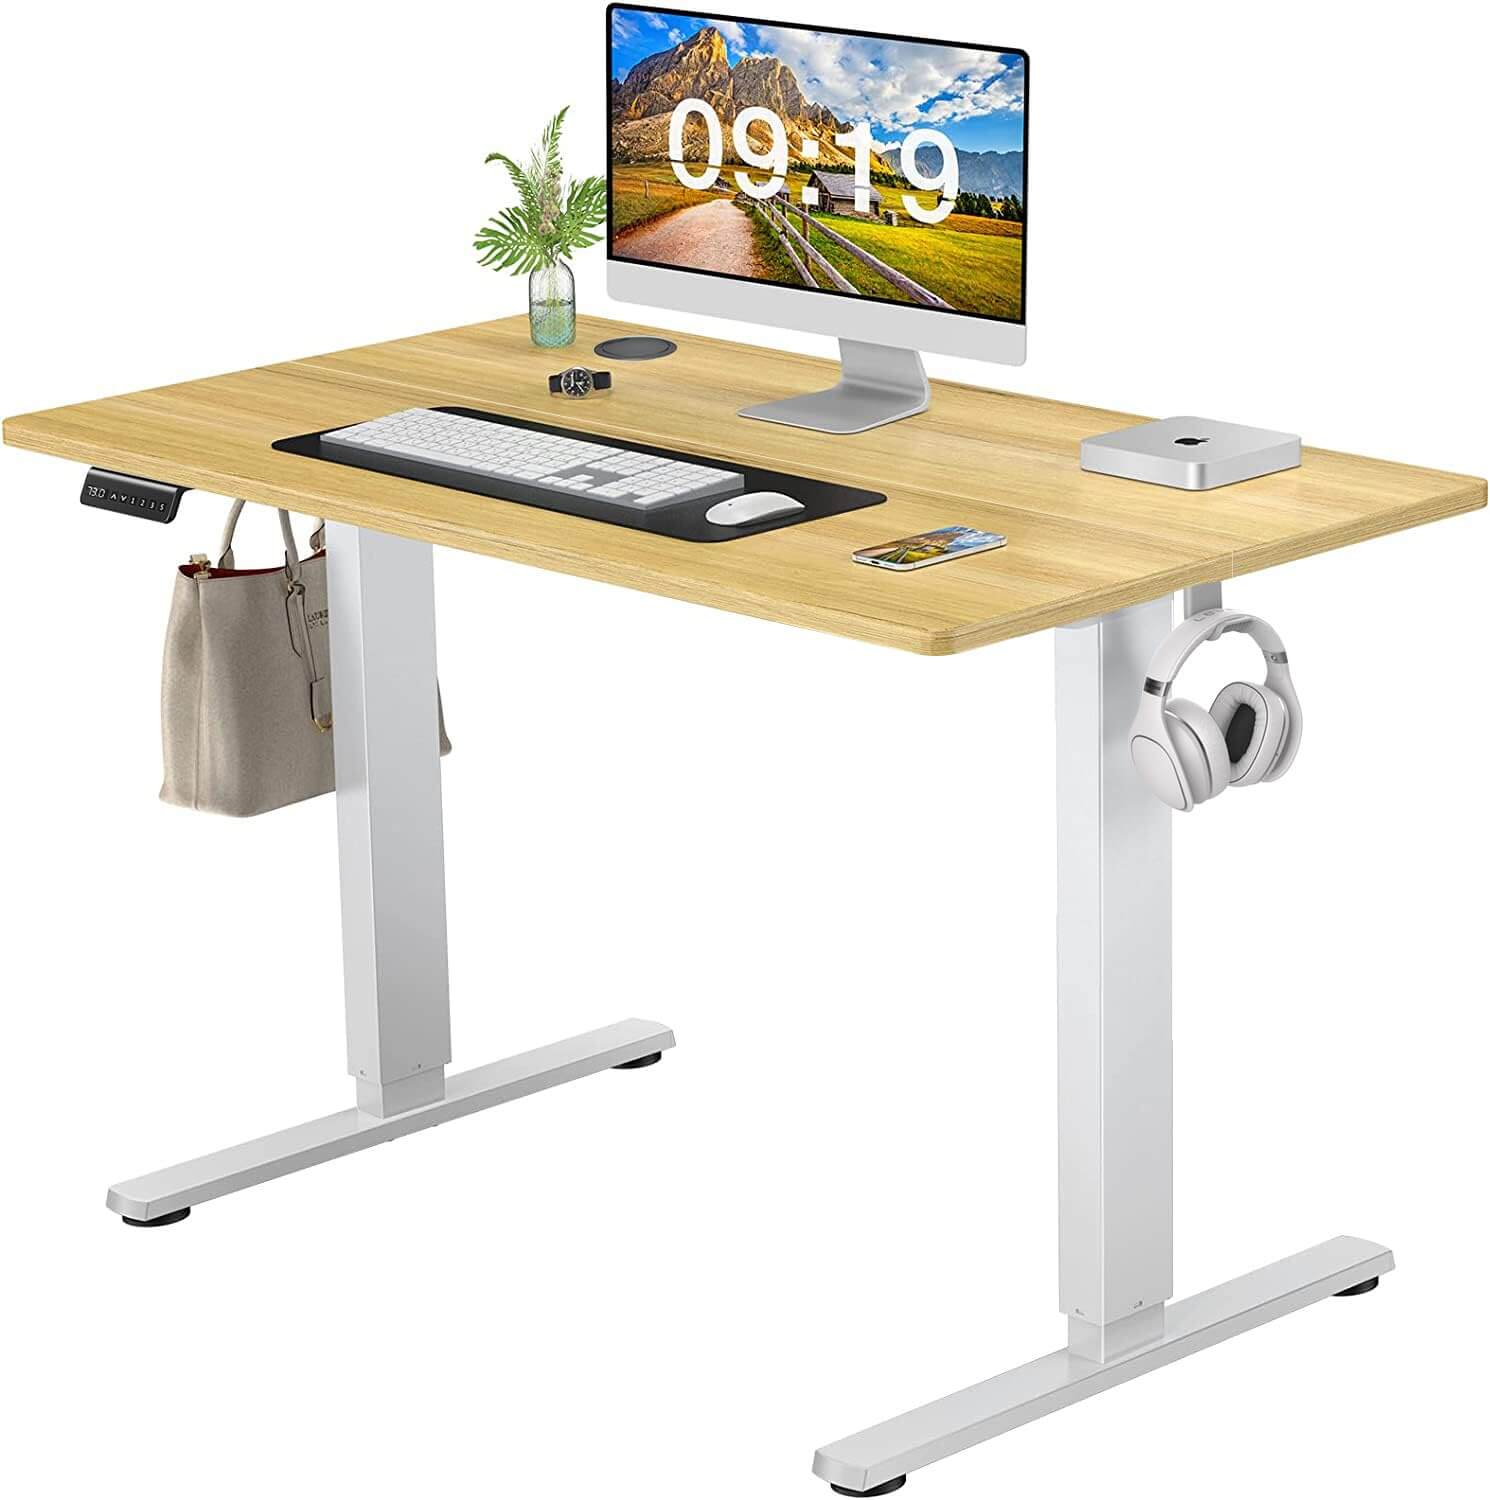 electric-adjustable-standing-desk#Color_Yellow#Size_40'' x 24"